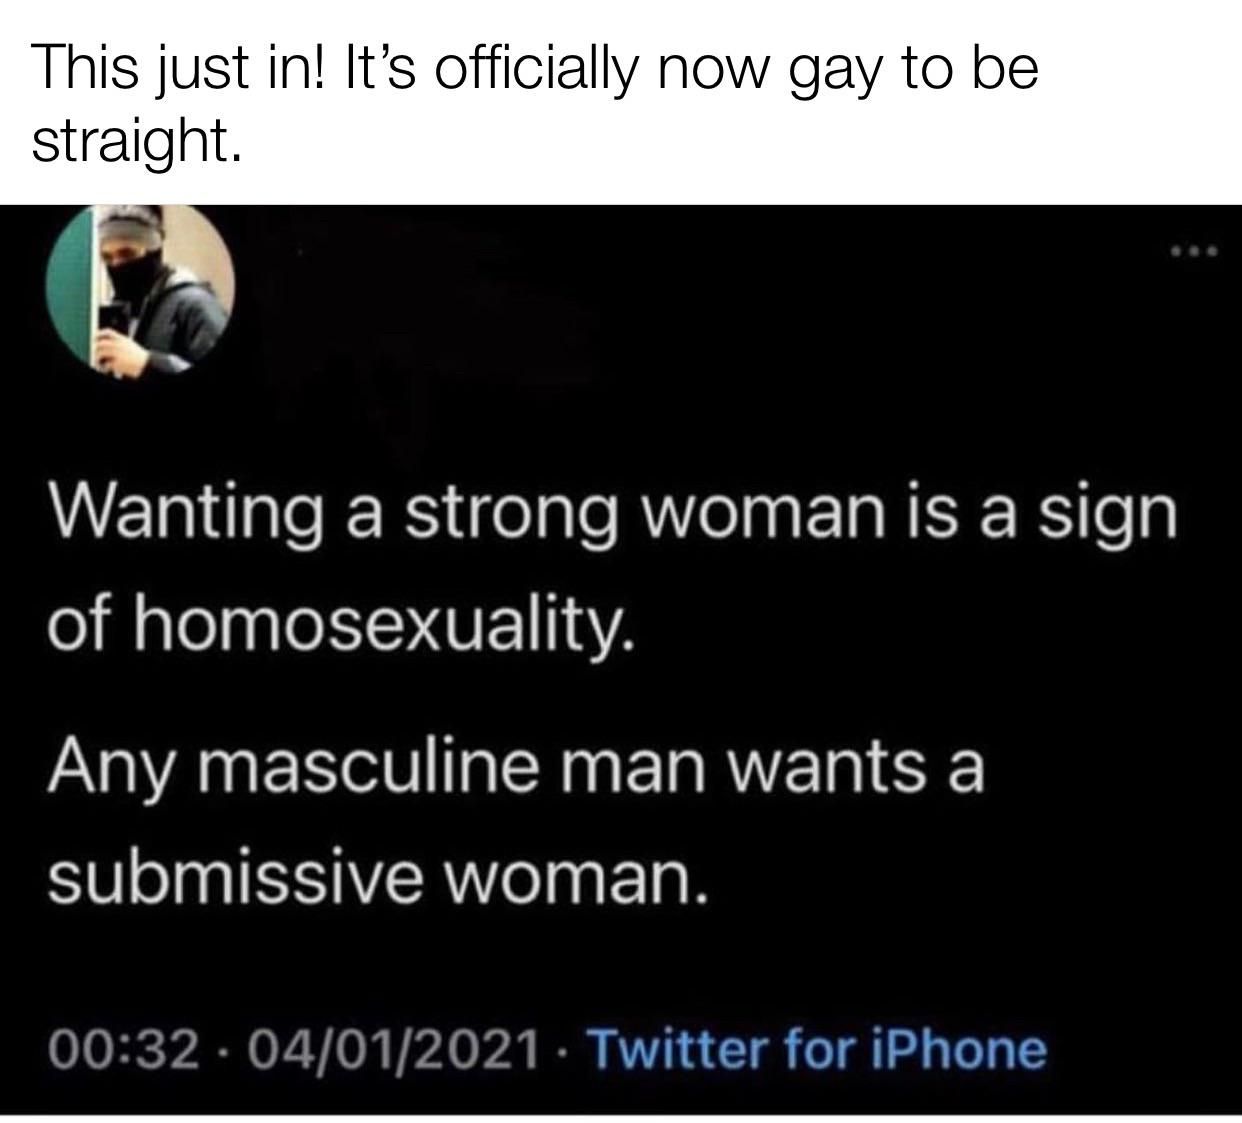 Gay is the new straight, I think.